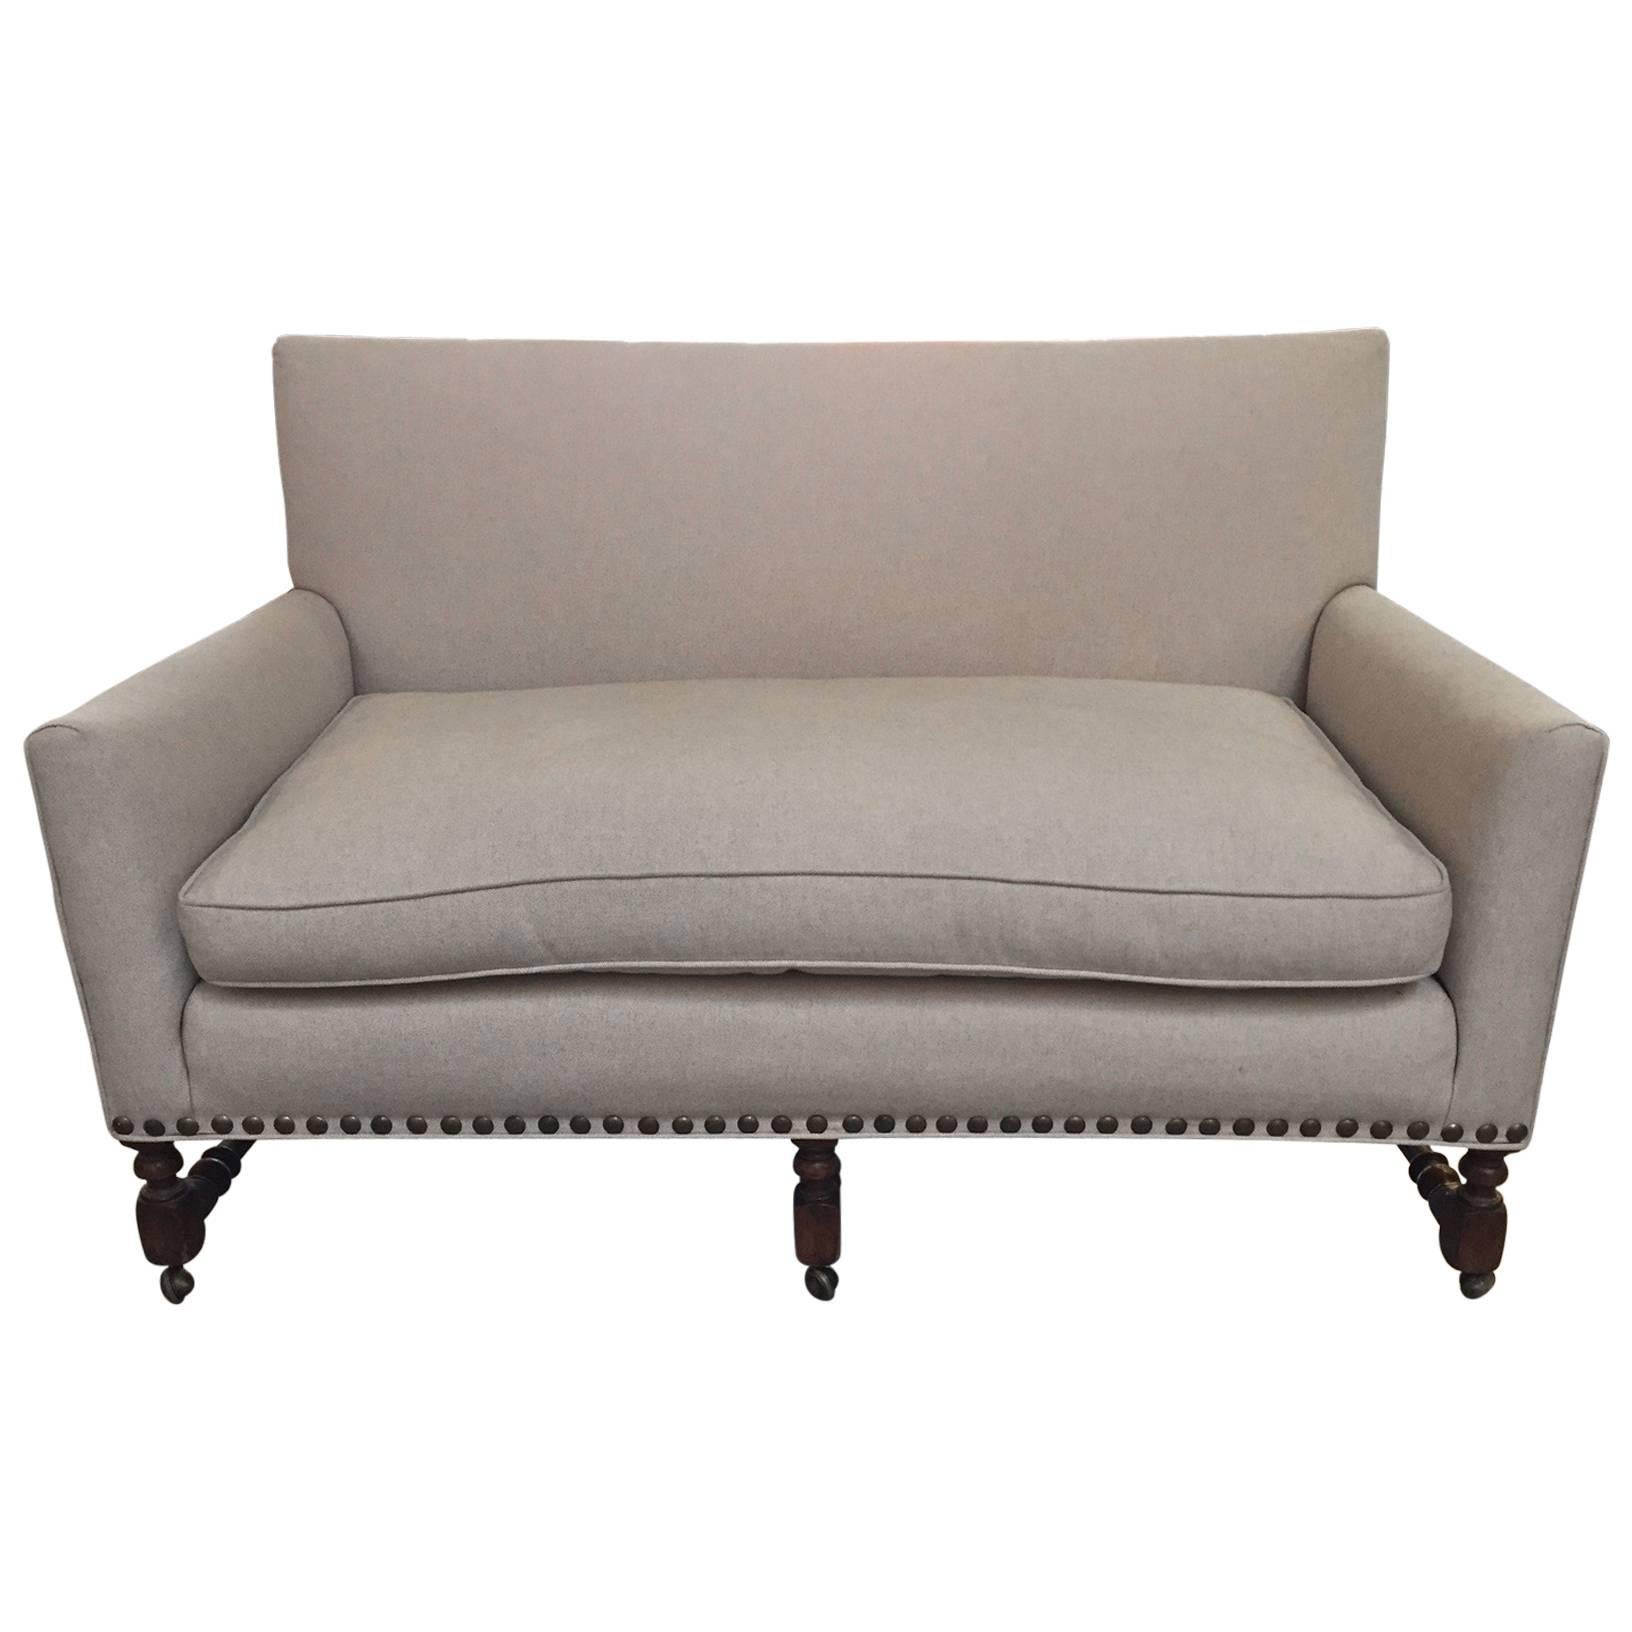 Tailored English Linen Loveseat with Turned Mahogany Frame on Casters